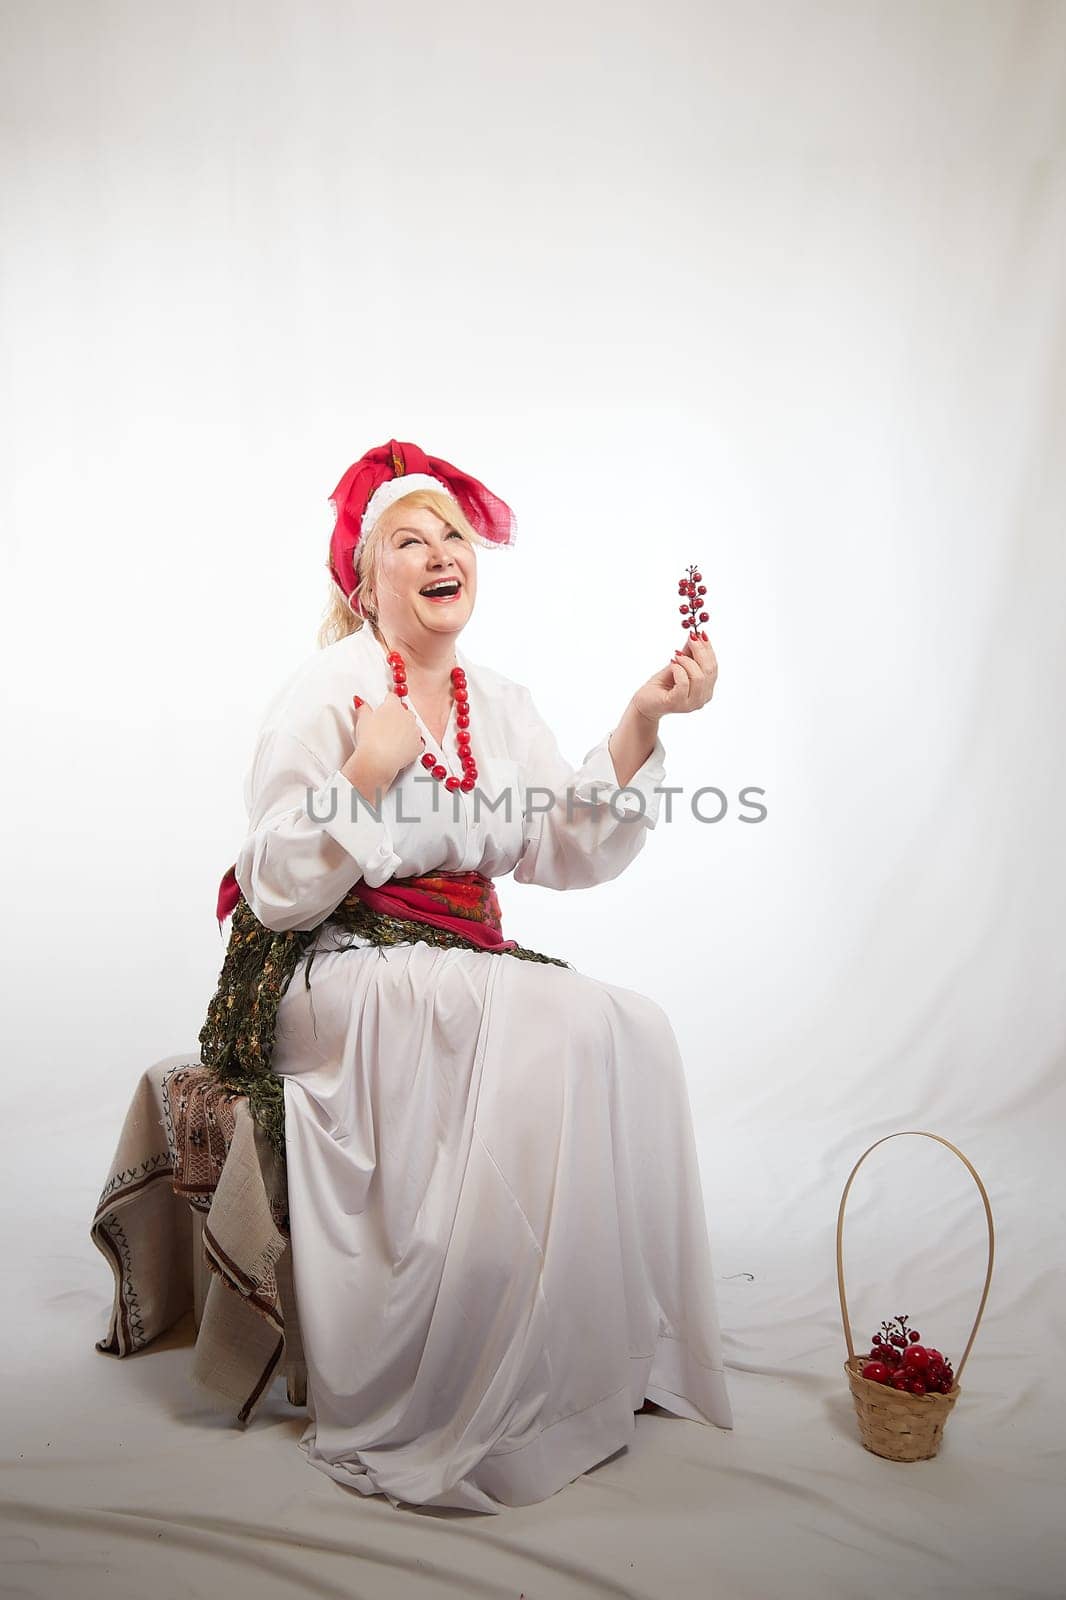 Portrait of heerful funny adult mature woman solokha with red berries. Female model in clothes of national ethnic Slavic style. Stylized Ukrainian, Belarusian or Russian woman in comic photo shoot by keleny